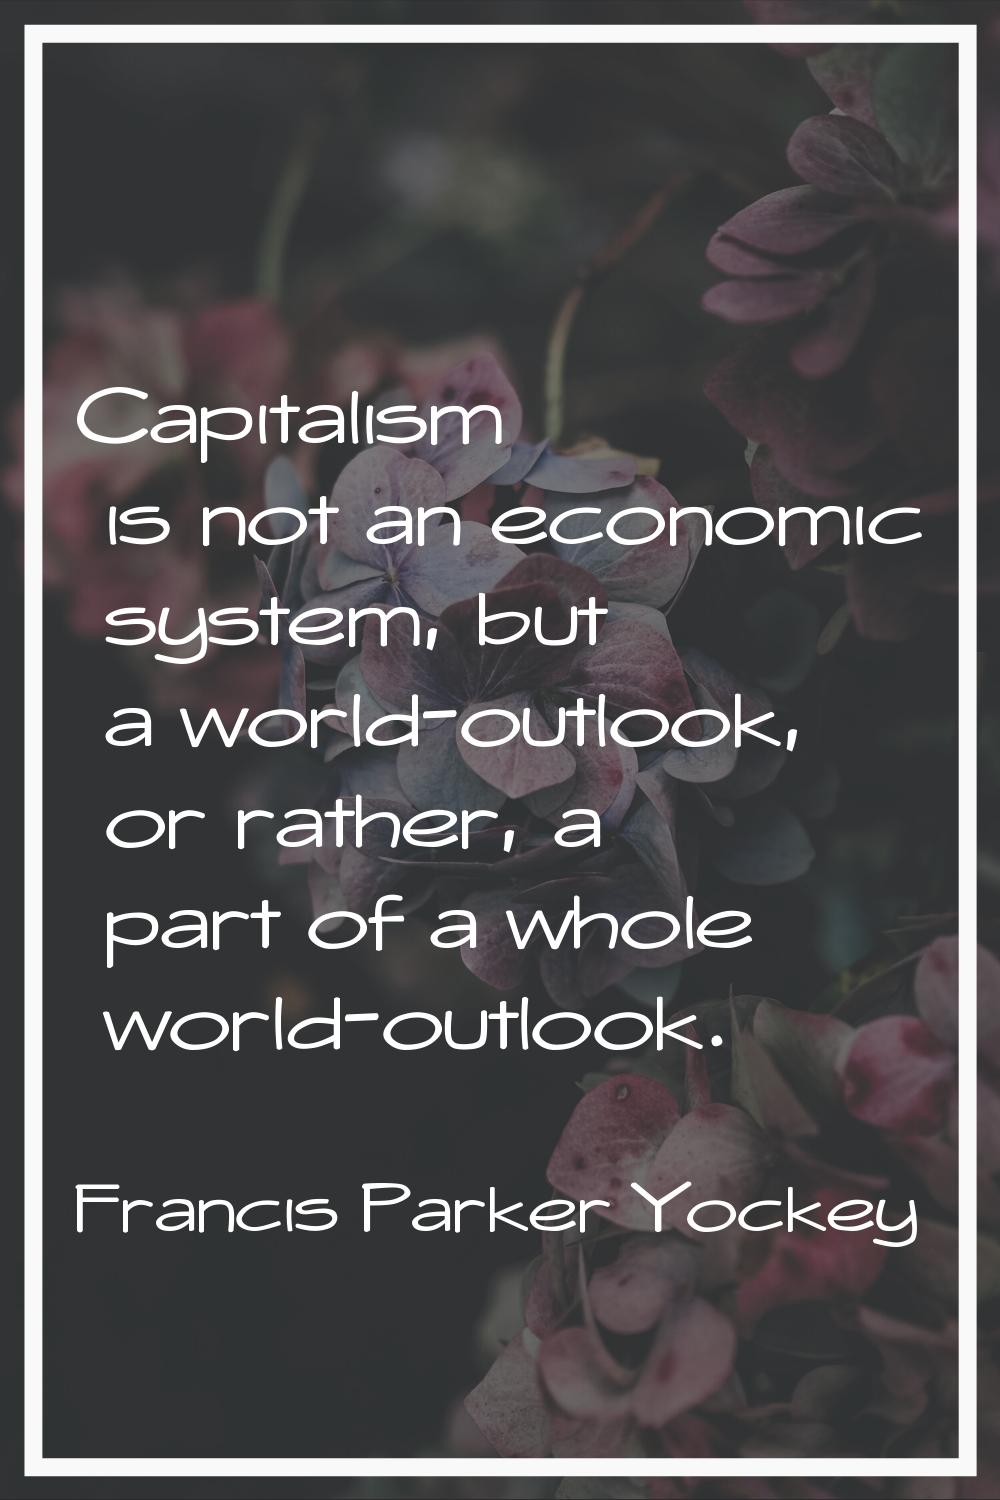 Capitalism is not an economic system, but a world-outlook, or rather, a part of a whole world-outlo